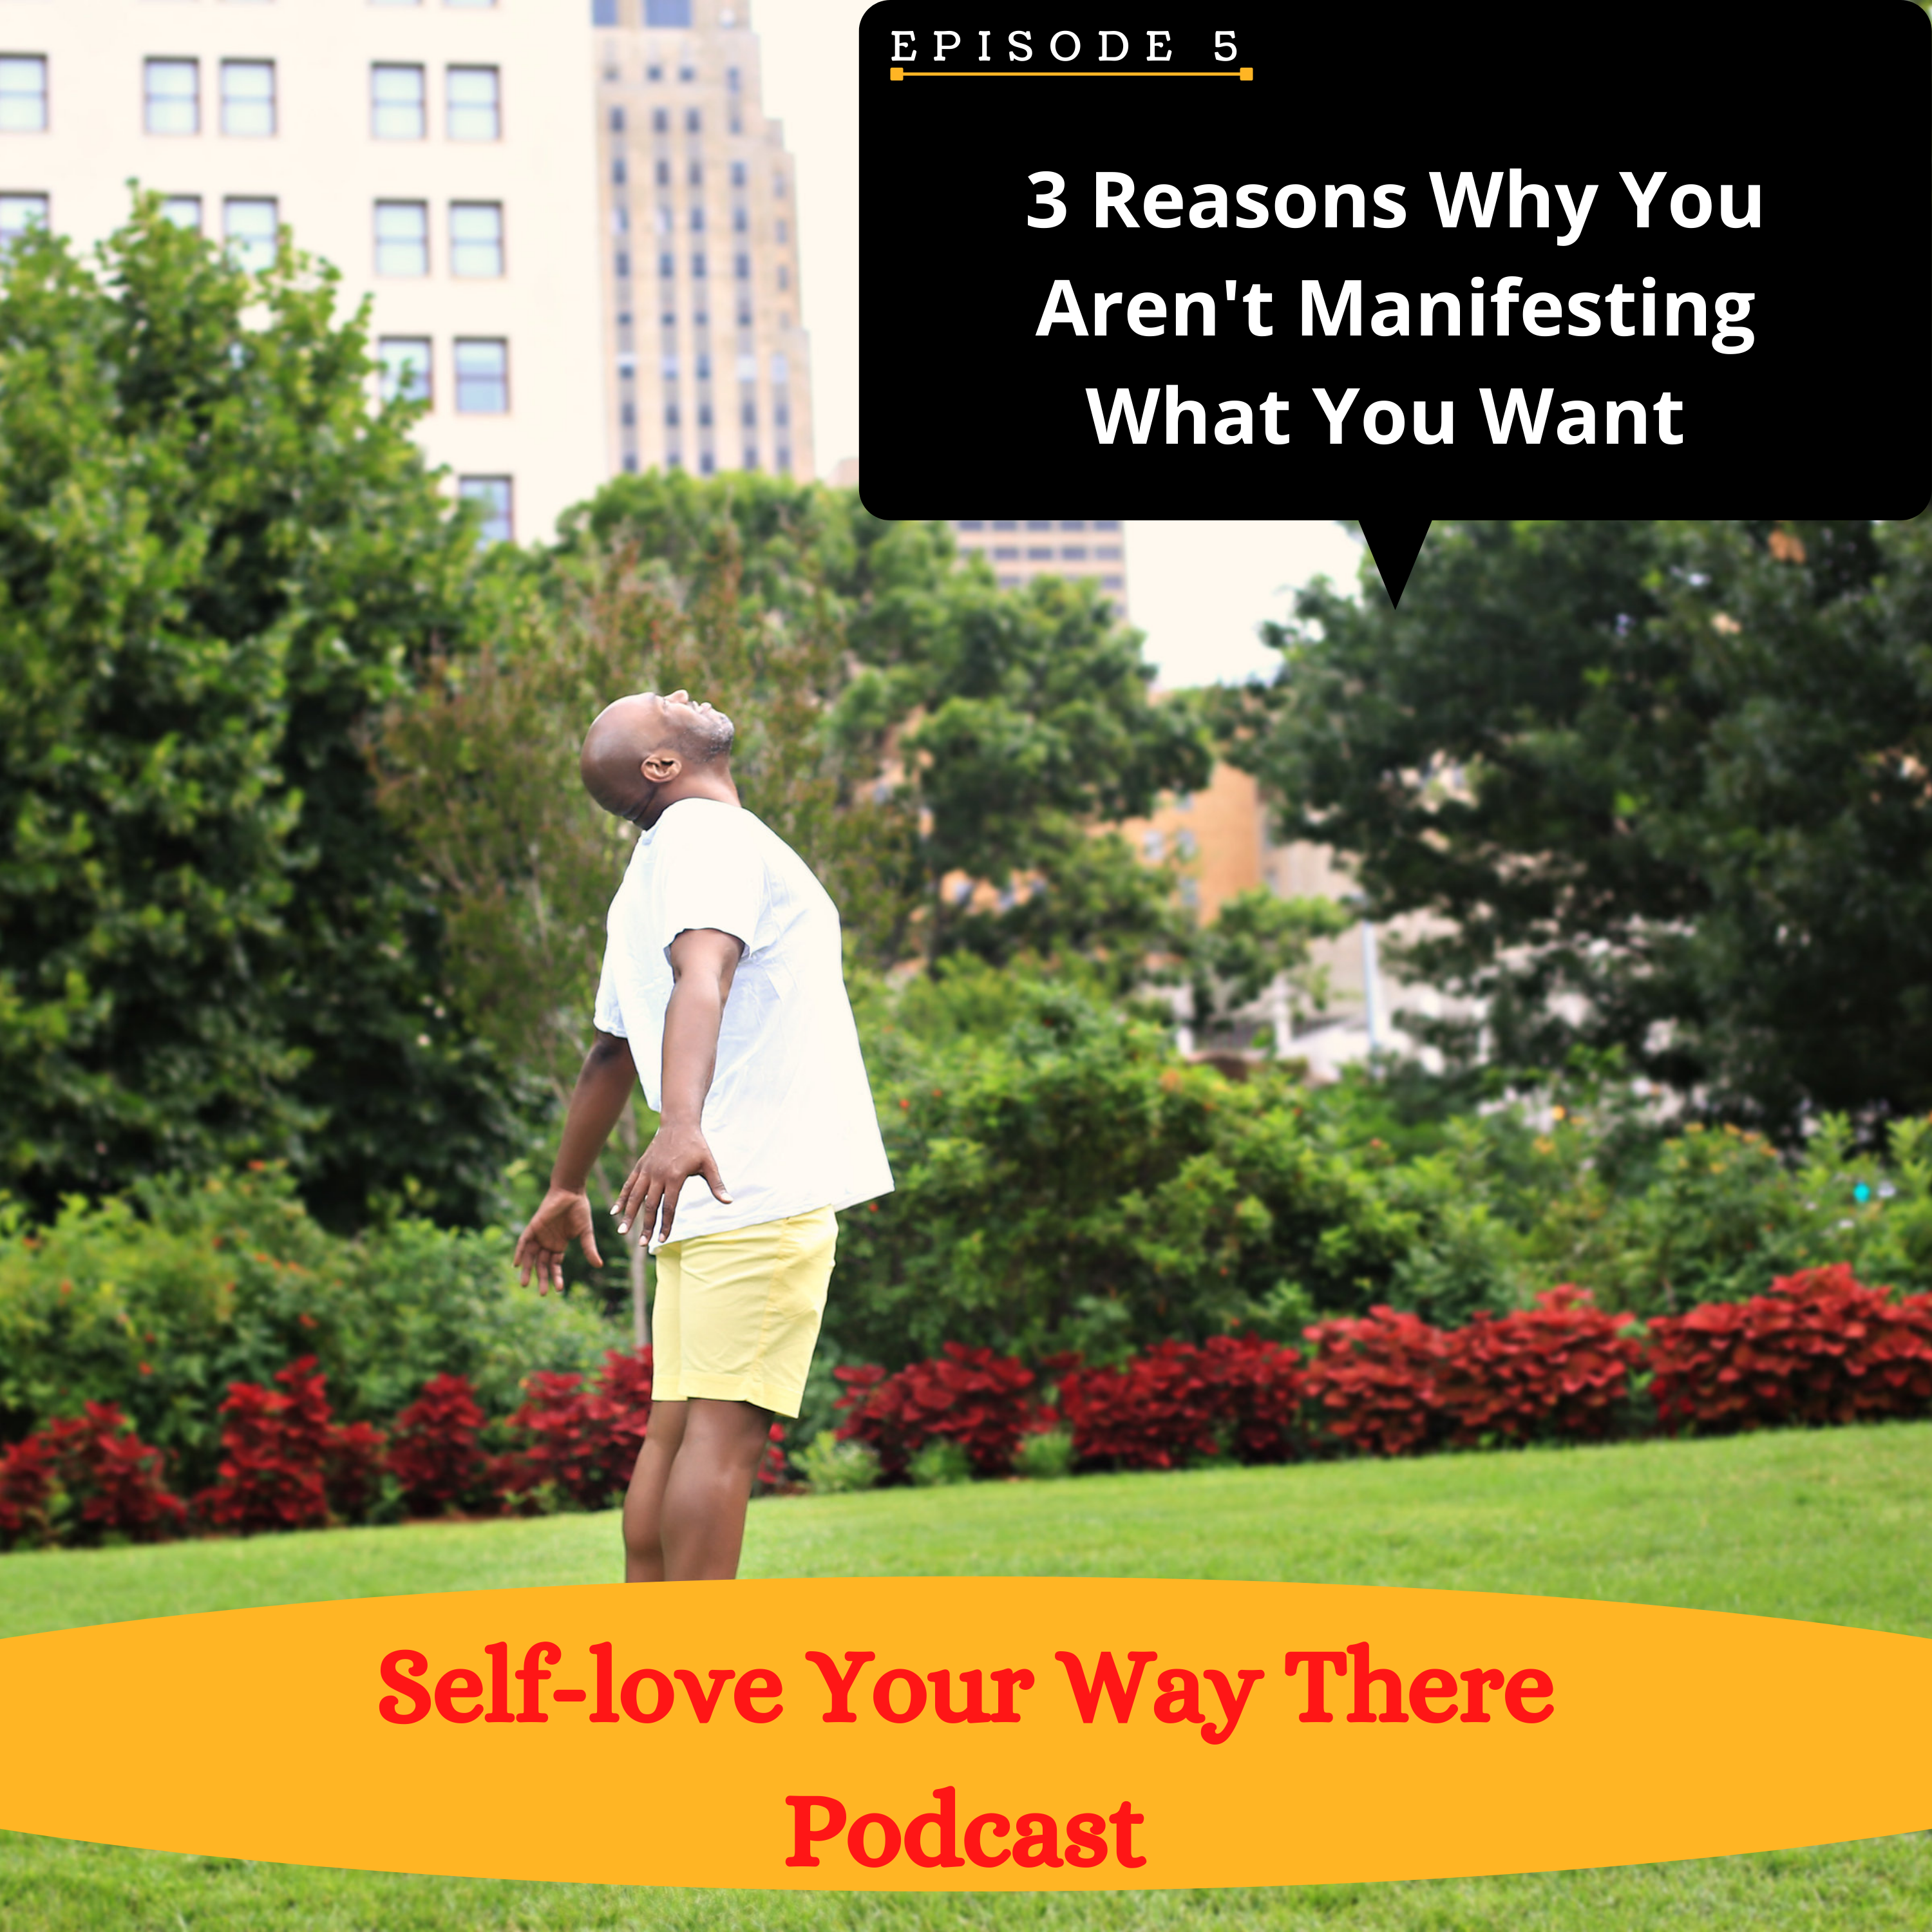 3 Reasons Why You Aren’t Manifesting What You Want